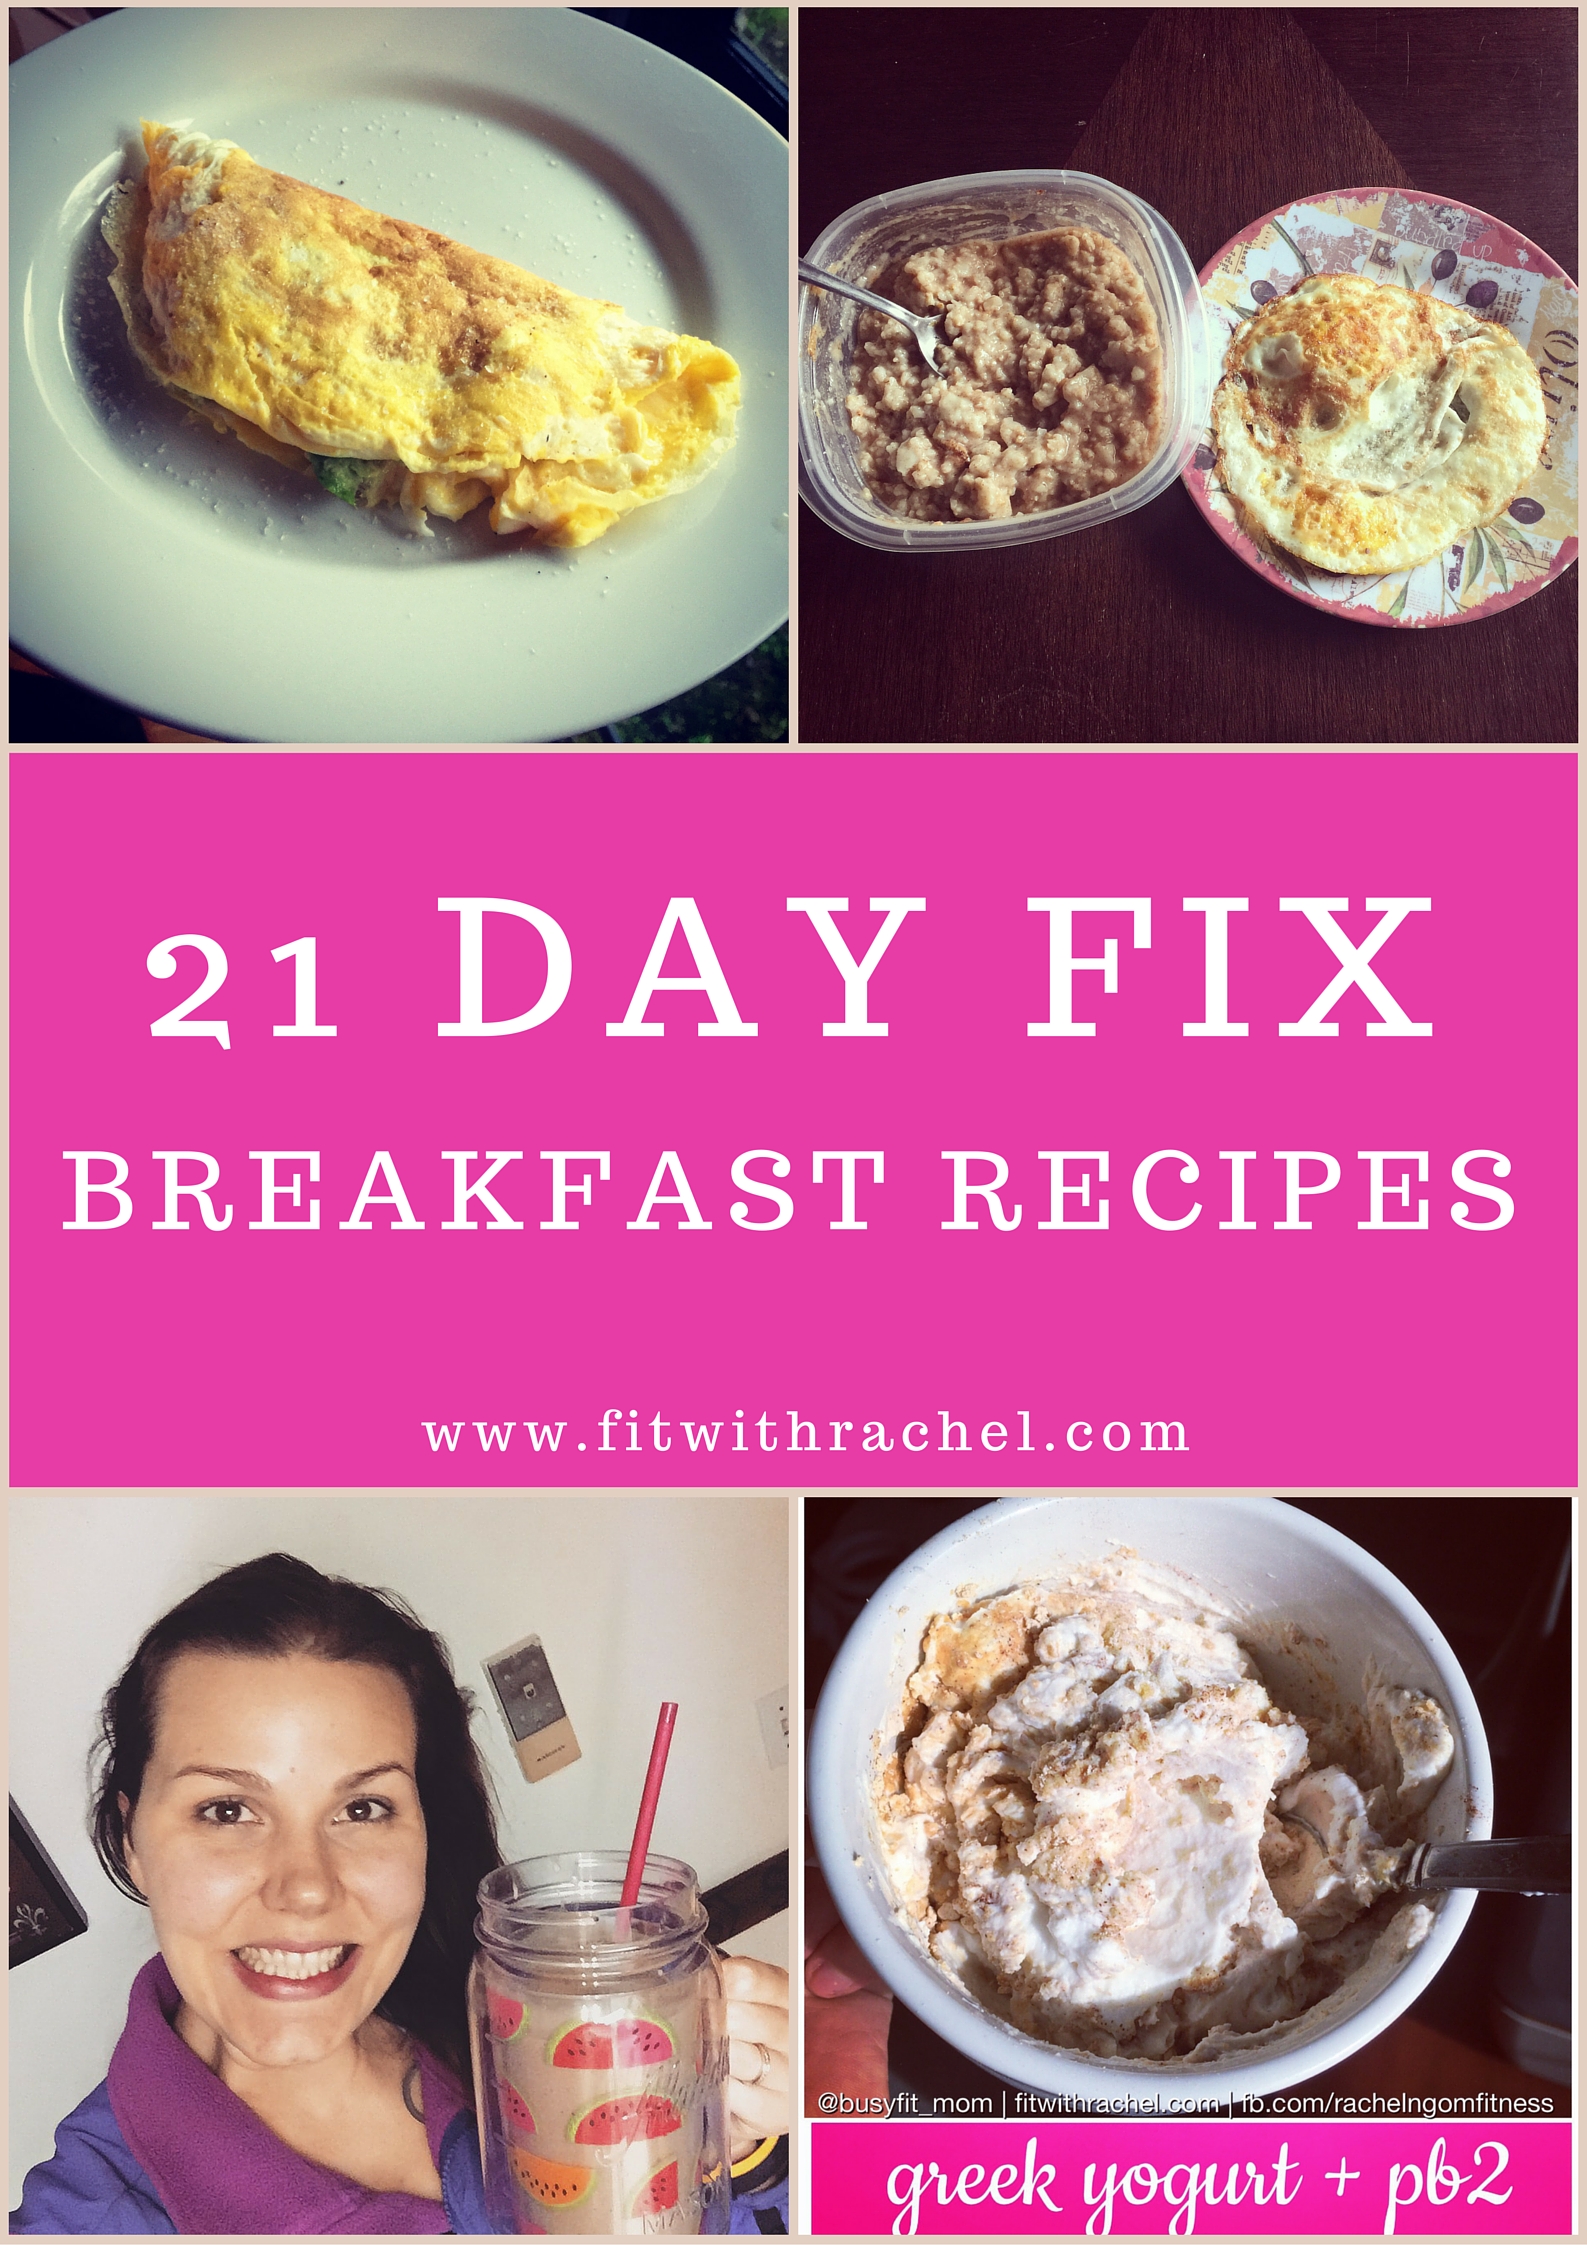 21 Day Fix Breakfast Recipes | Fit with Rachel